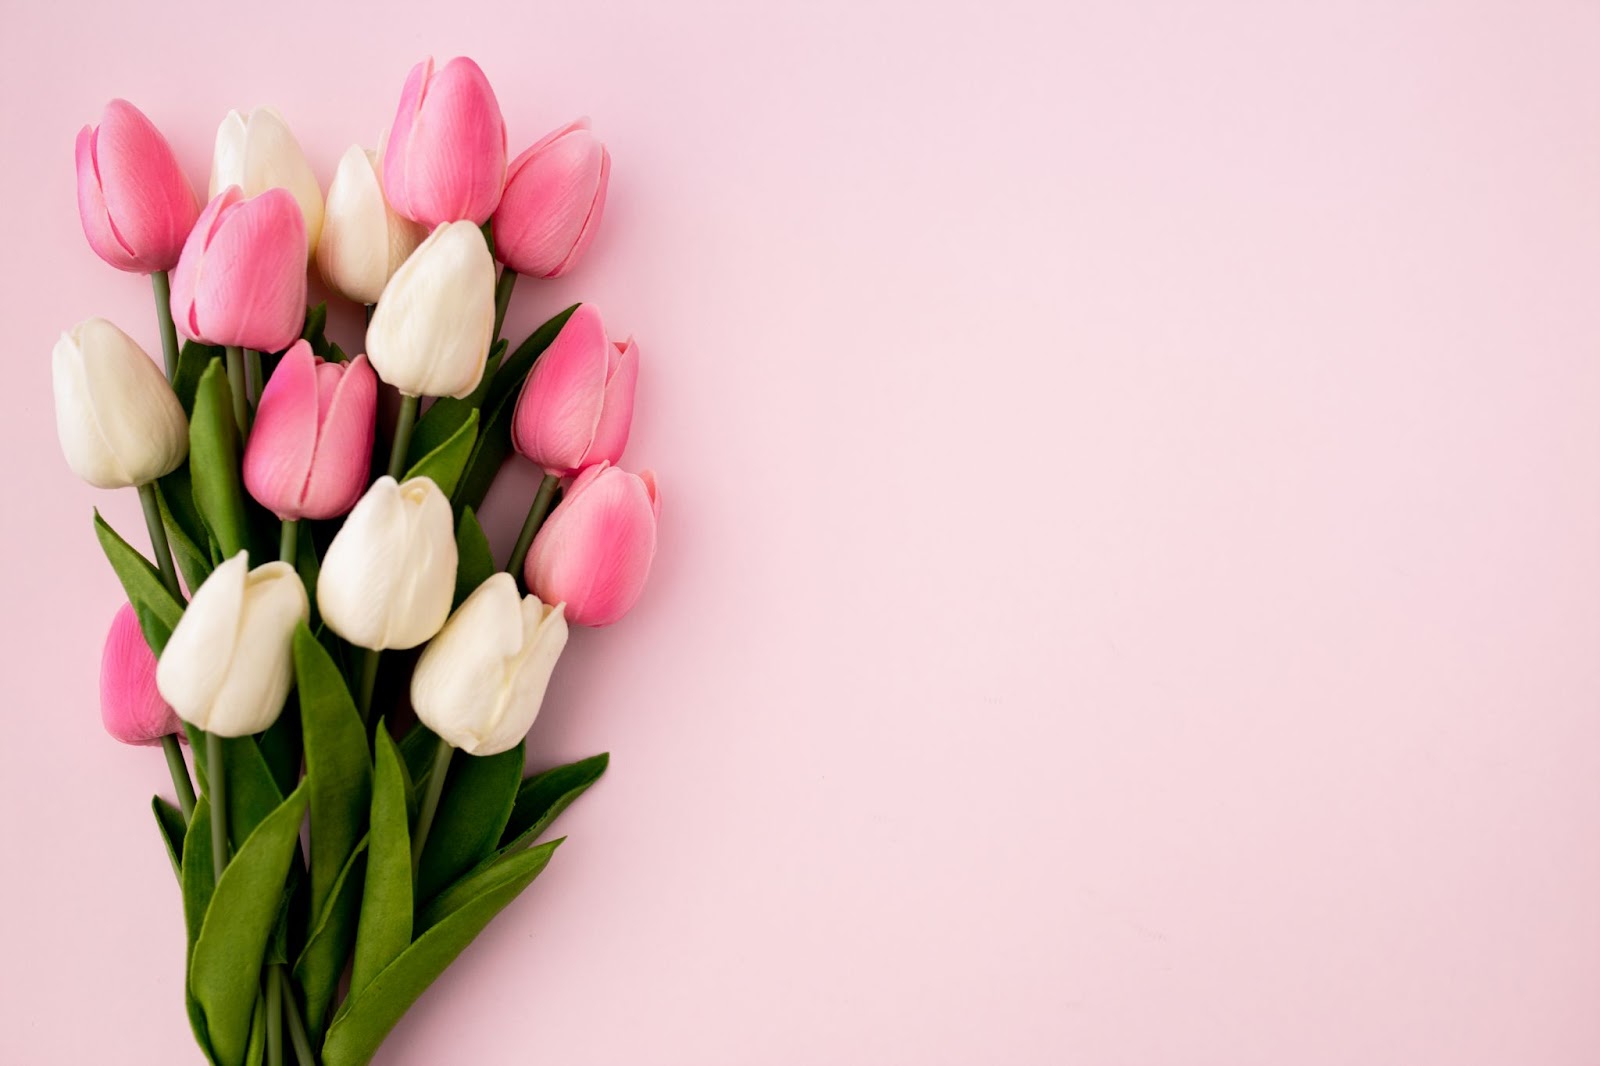 What Do Tulips Represent? 10 Intriguing Meanings Behind Tulips